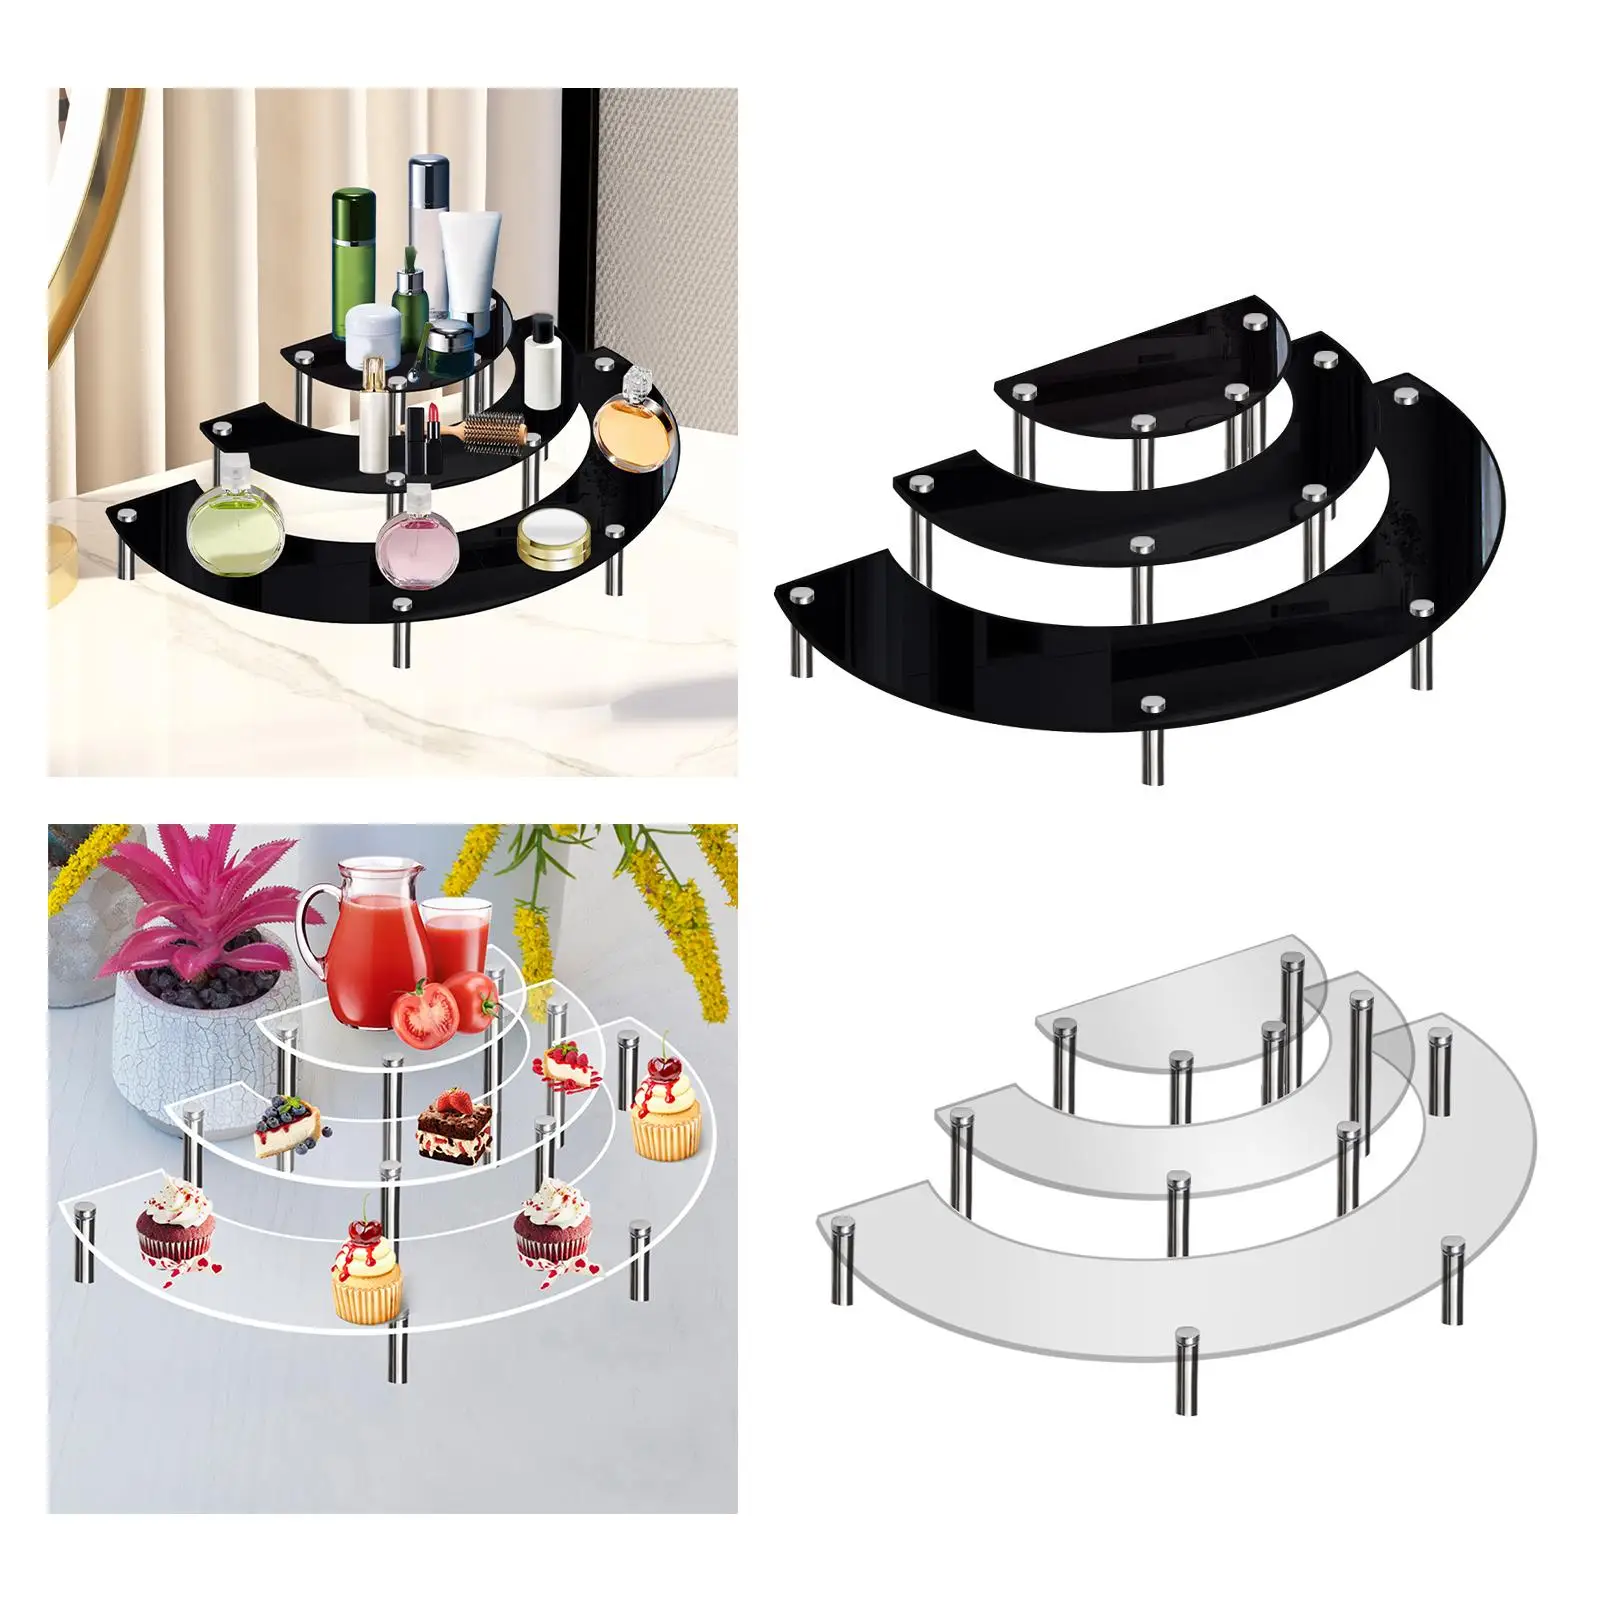 Cupcake Stand 3 Tier Retail Step Shelf Display Stand for Perfume Appetizers Wedding Figurines Cosmetics